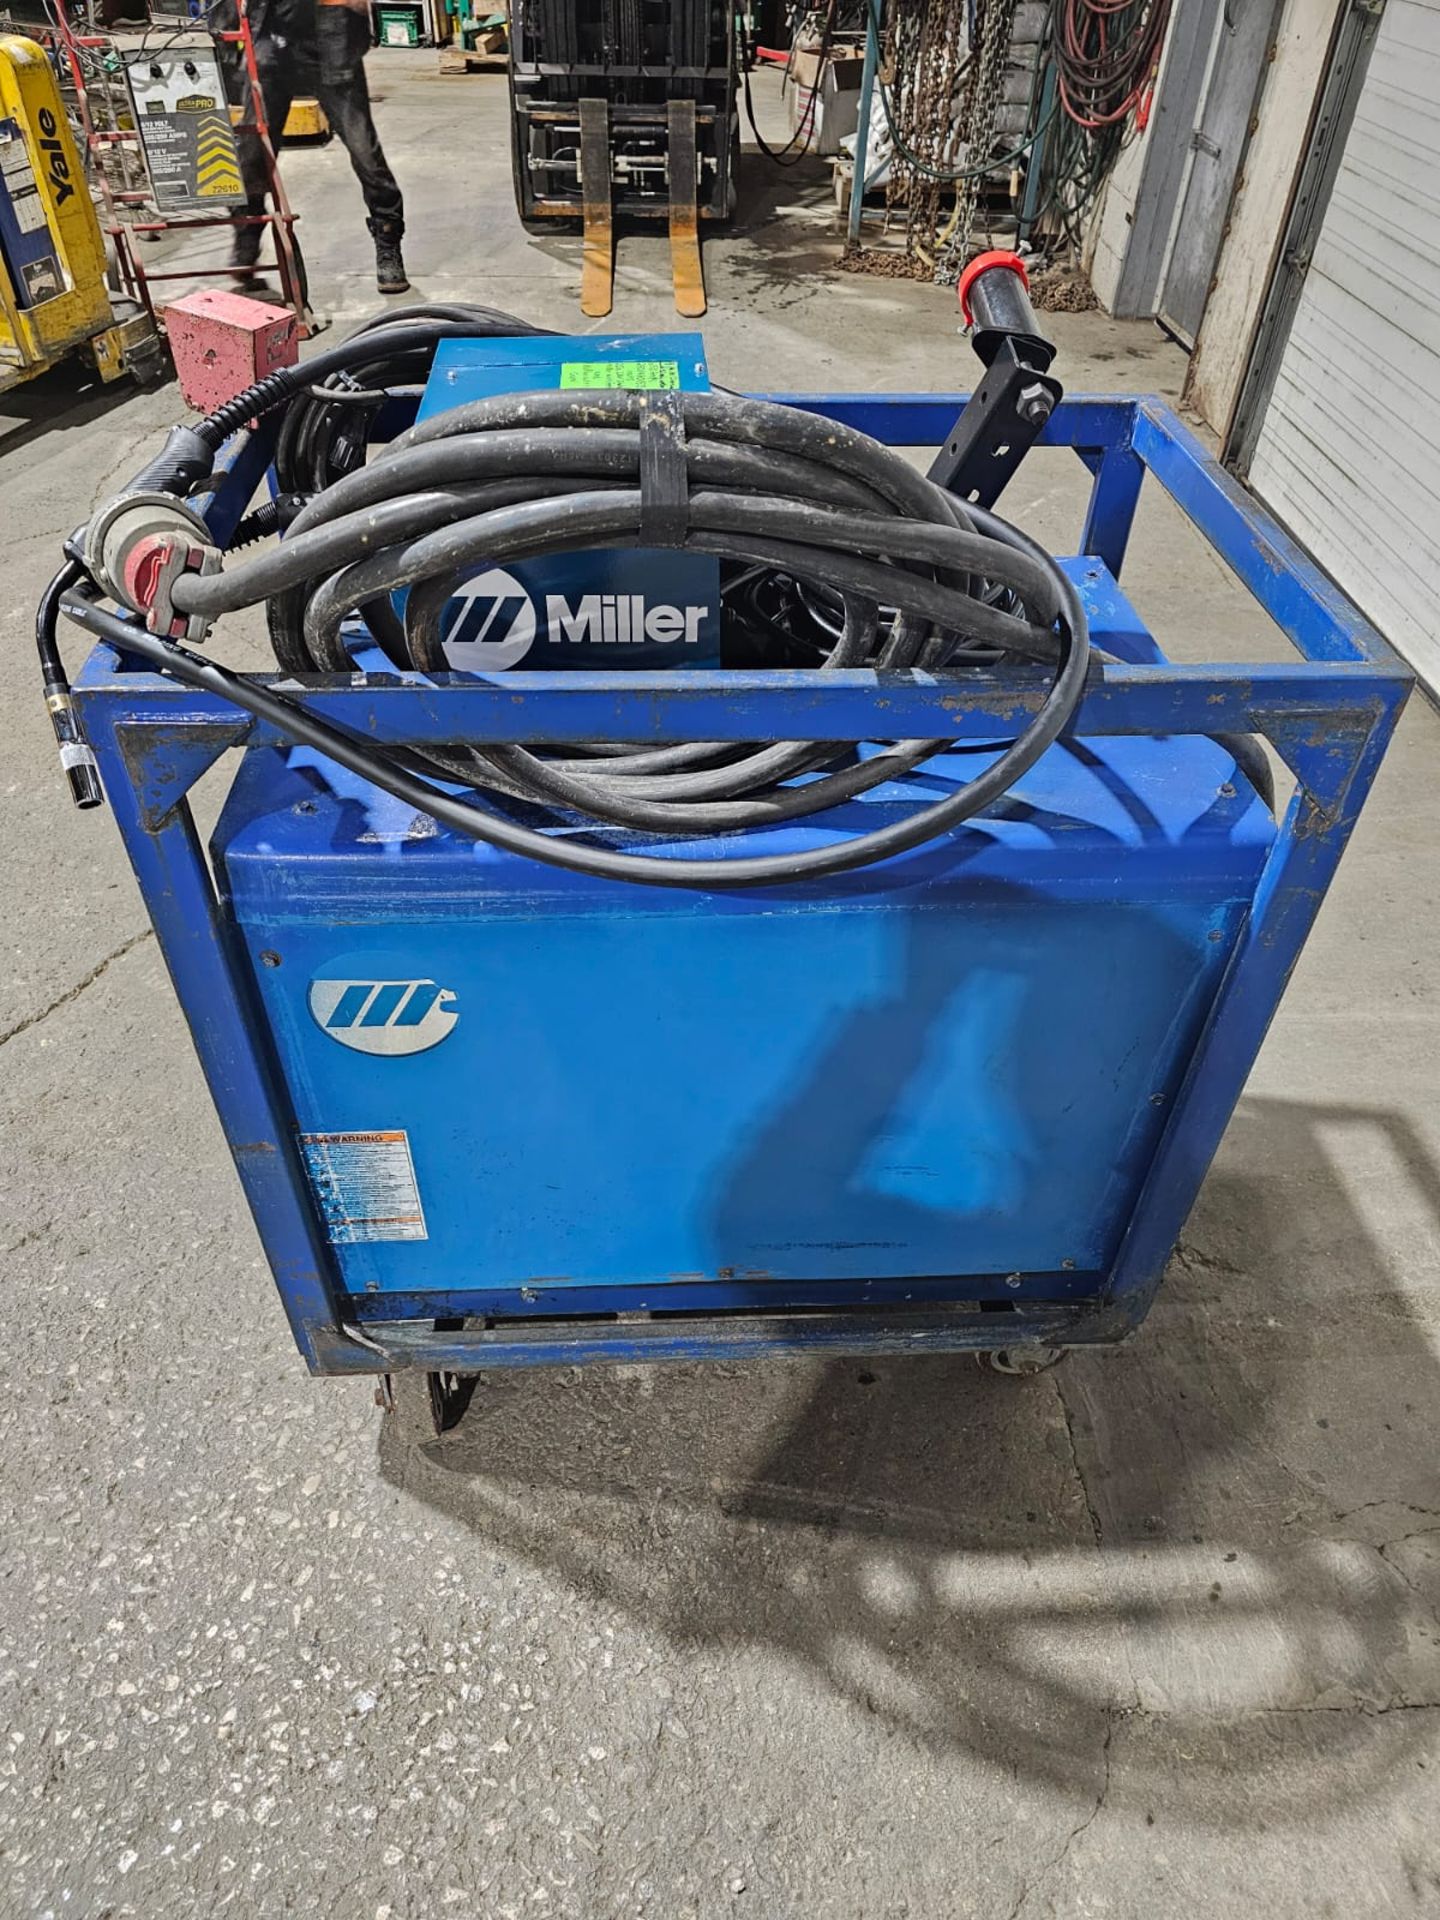 Miller Dimension 652 Mig Welder 650 Amp Mig Tig Stick Multi Process Power Source with 22A Wire - Image 3 of 6